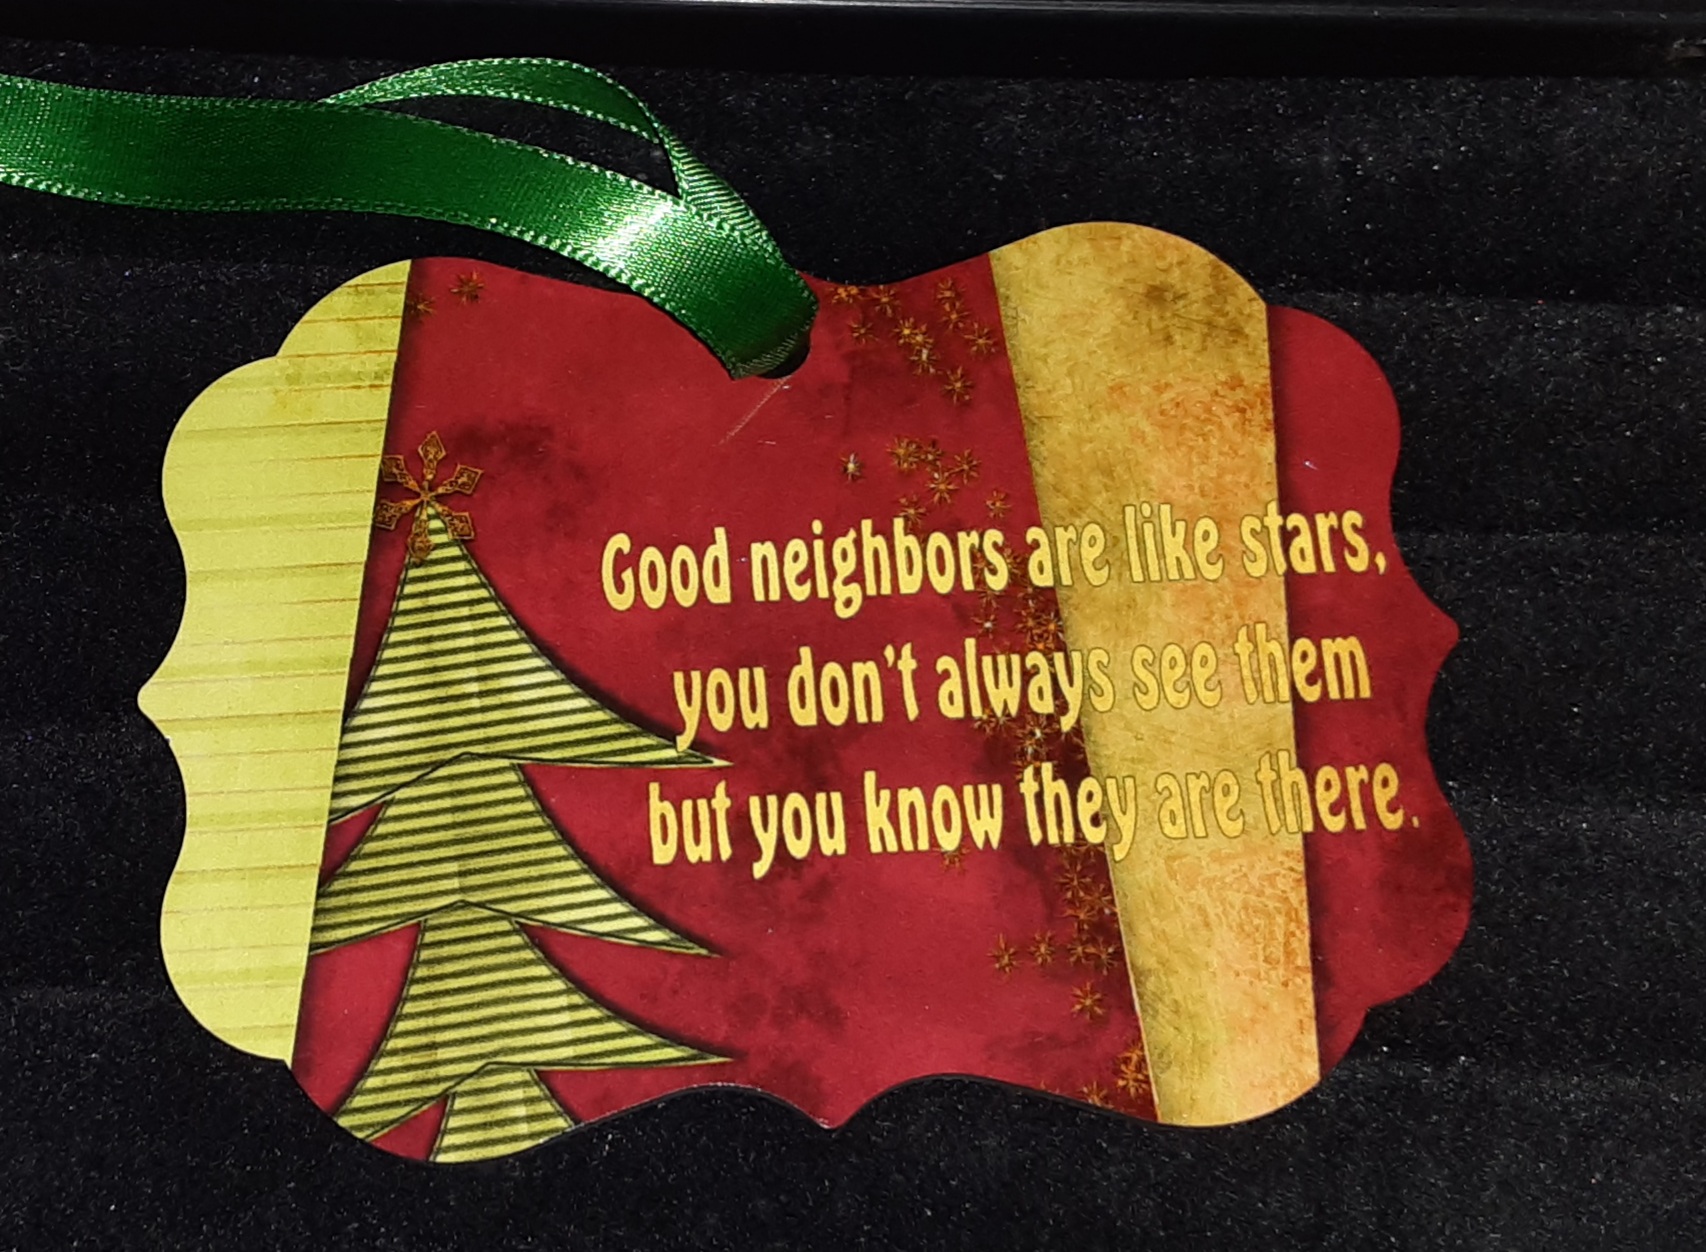 Christmas ornament made with sublimation printing